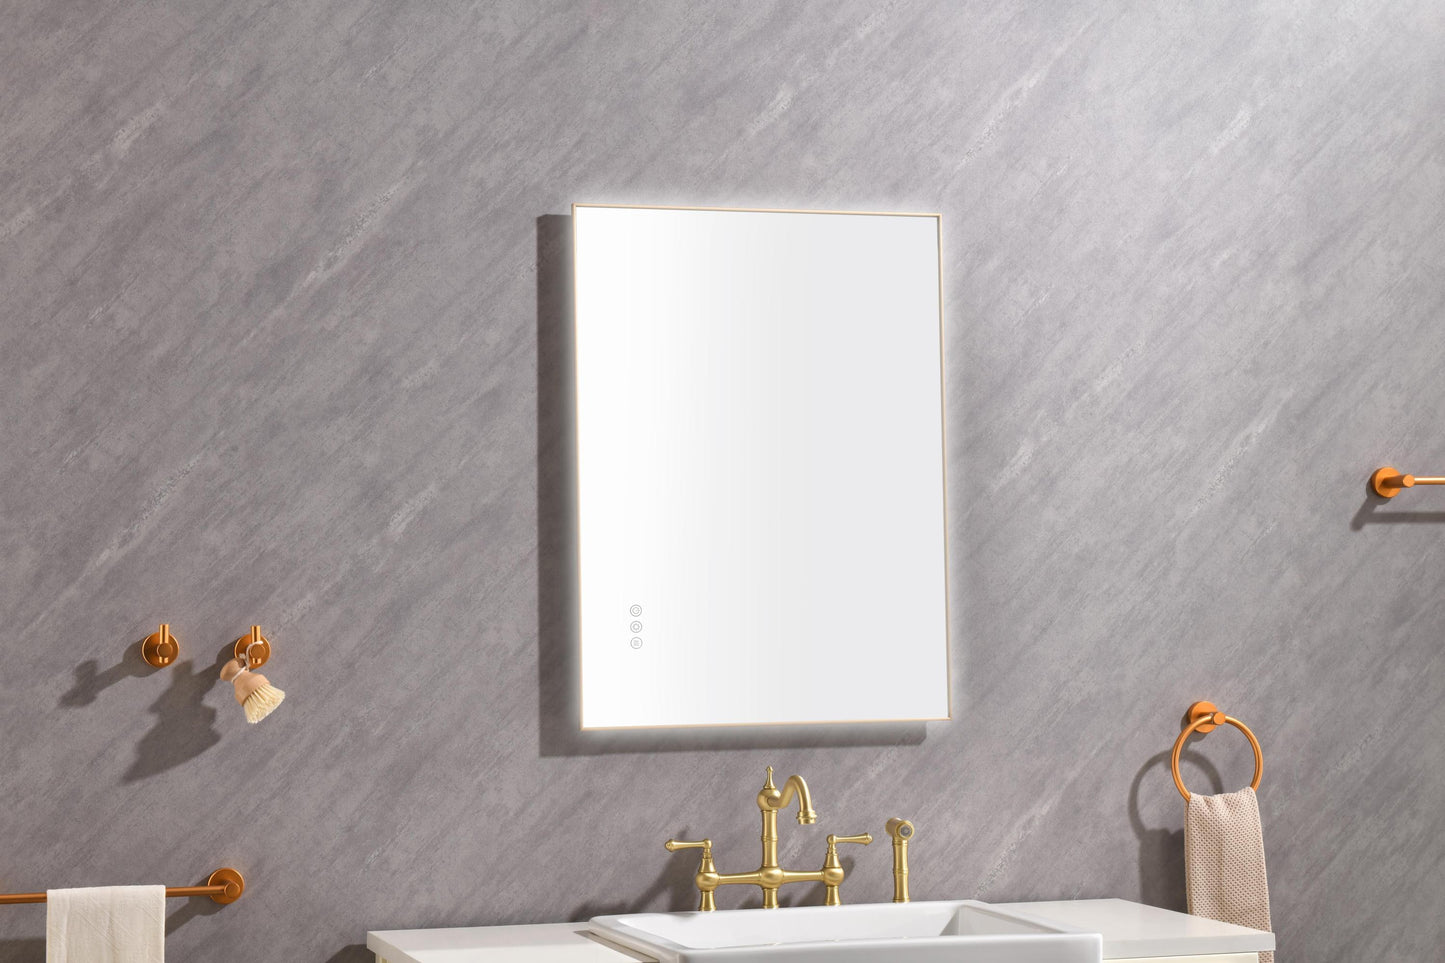 LTL needs to consult the warehouse addressSuper Bright Led Bathroom Mirror with Lights, Metal Frame Mirror Wall Mounted Lighted Vanity Mirrors for Wall, Anti Fog Dimmable Led Mirror for Makeup,